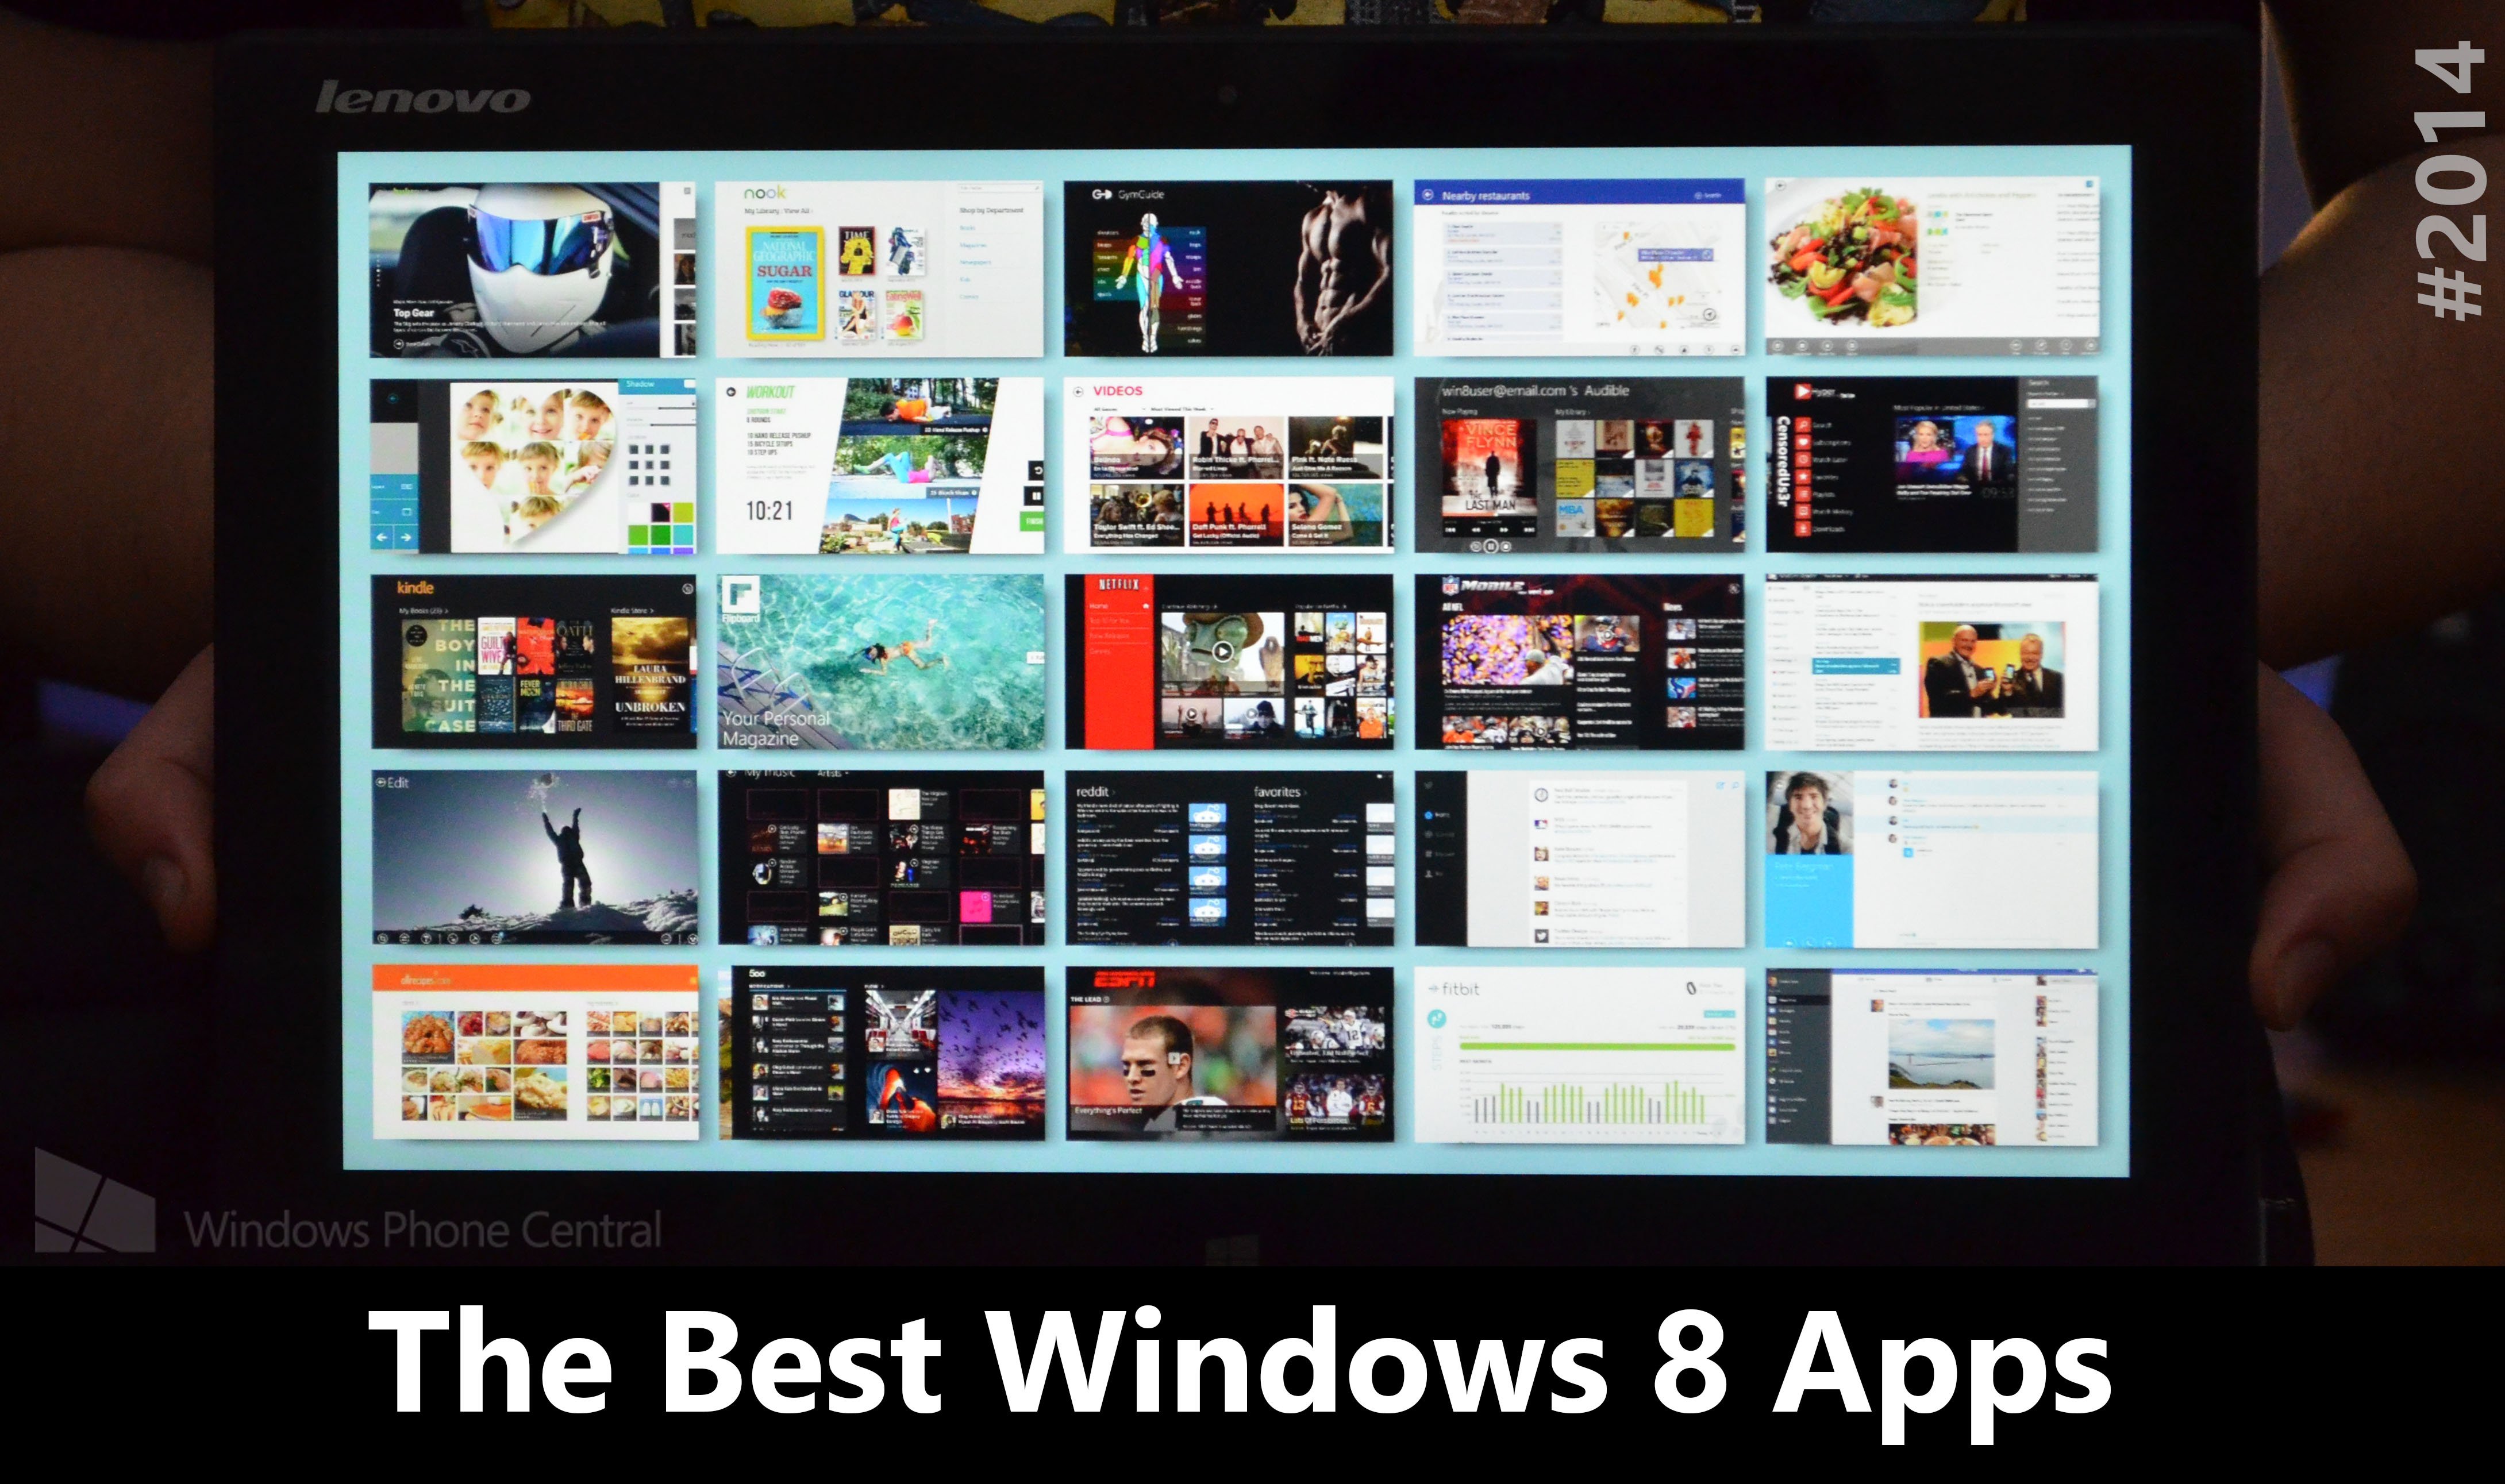 The best Windows 8 apps to begin 2014 (Part One)